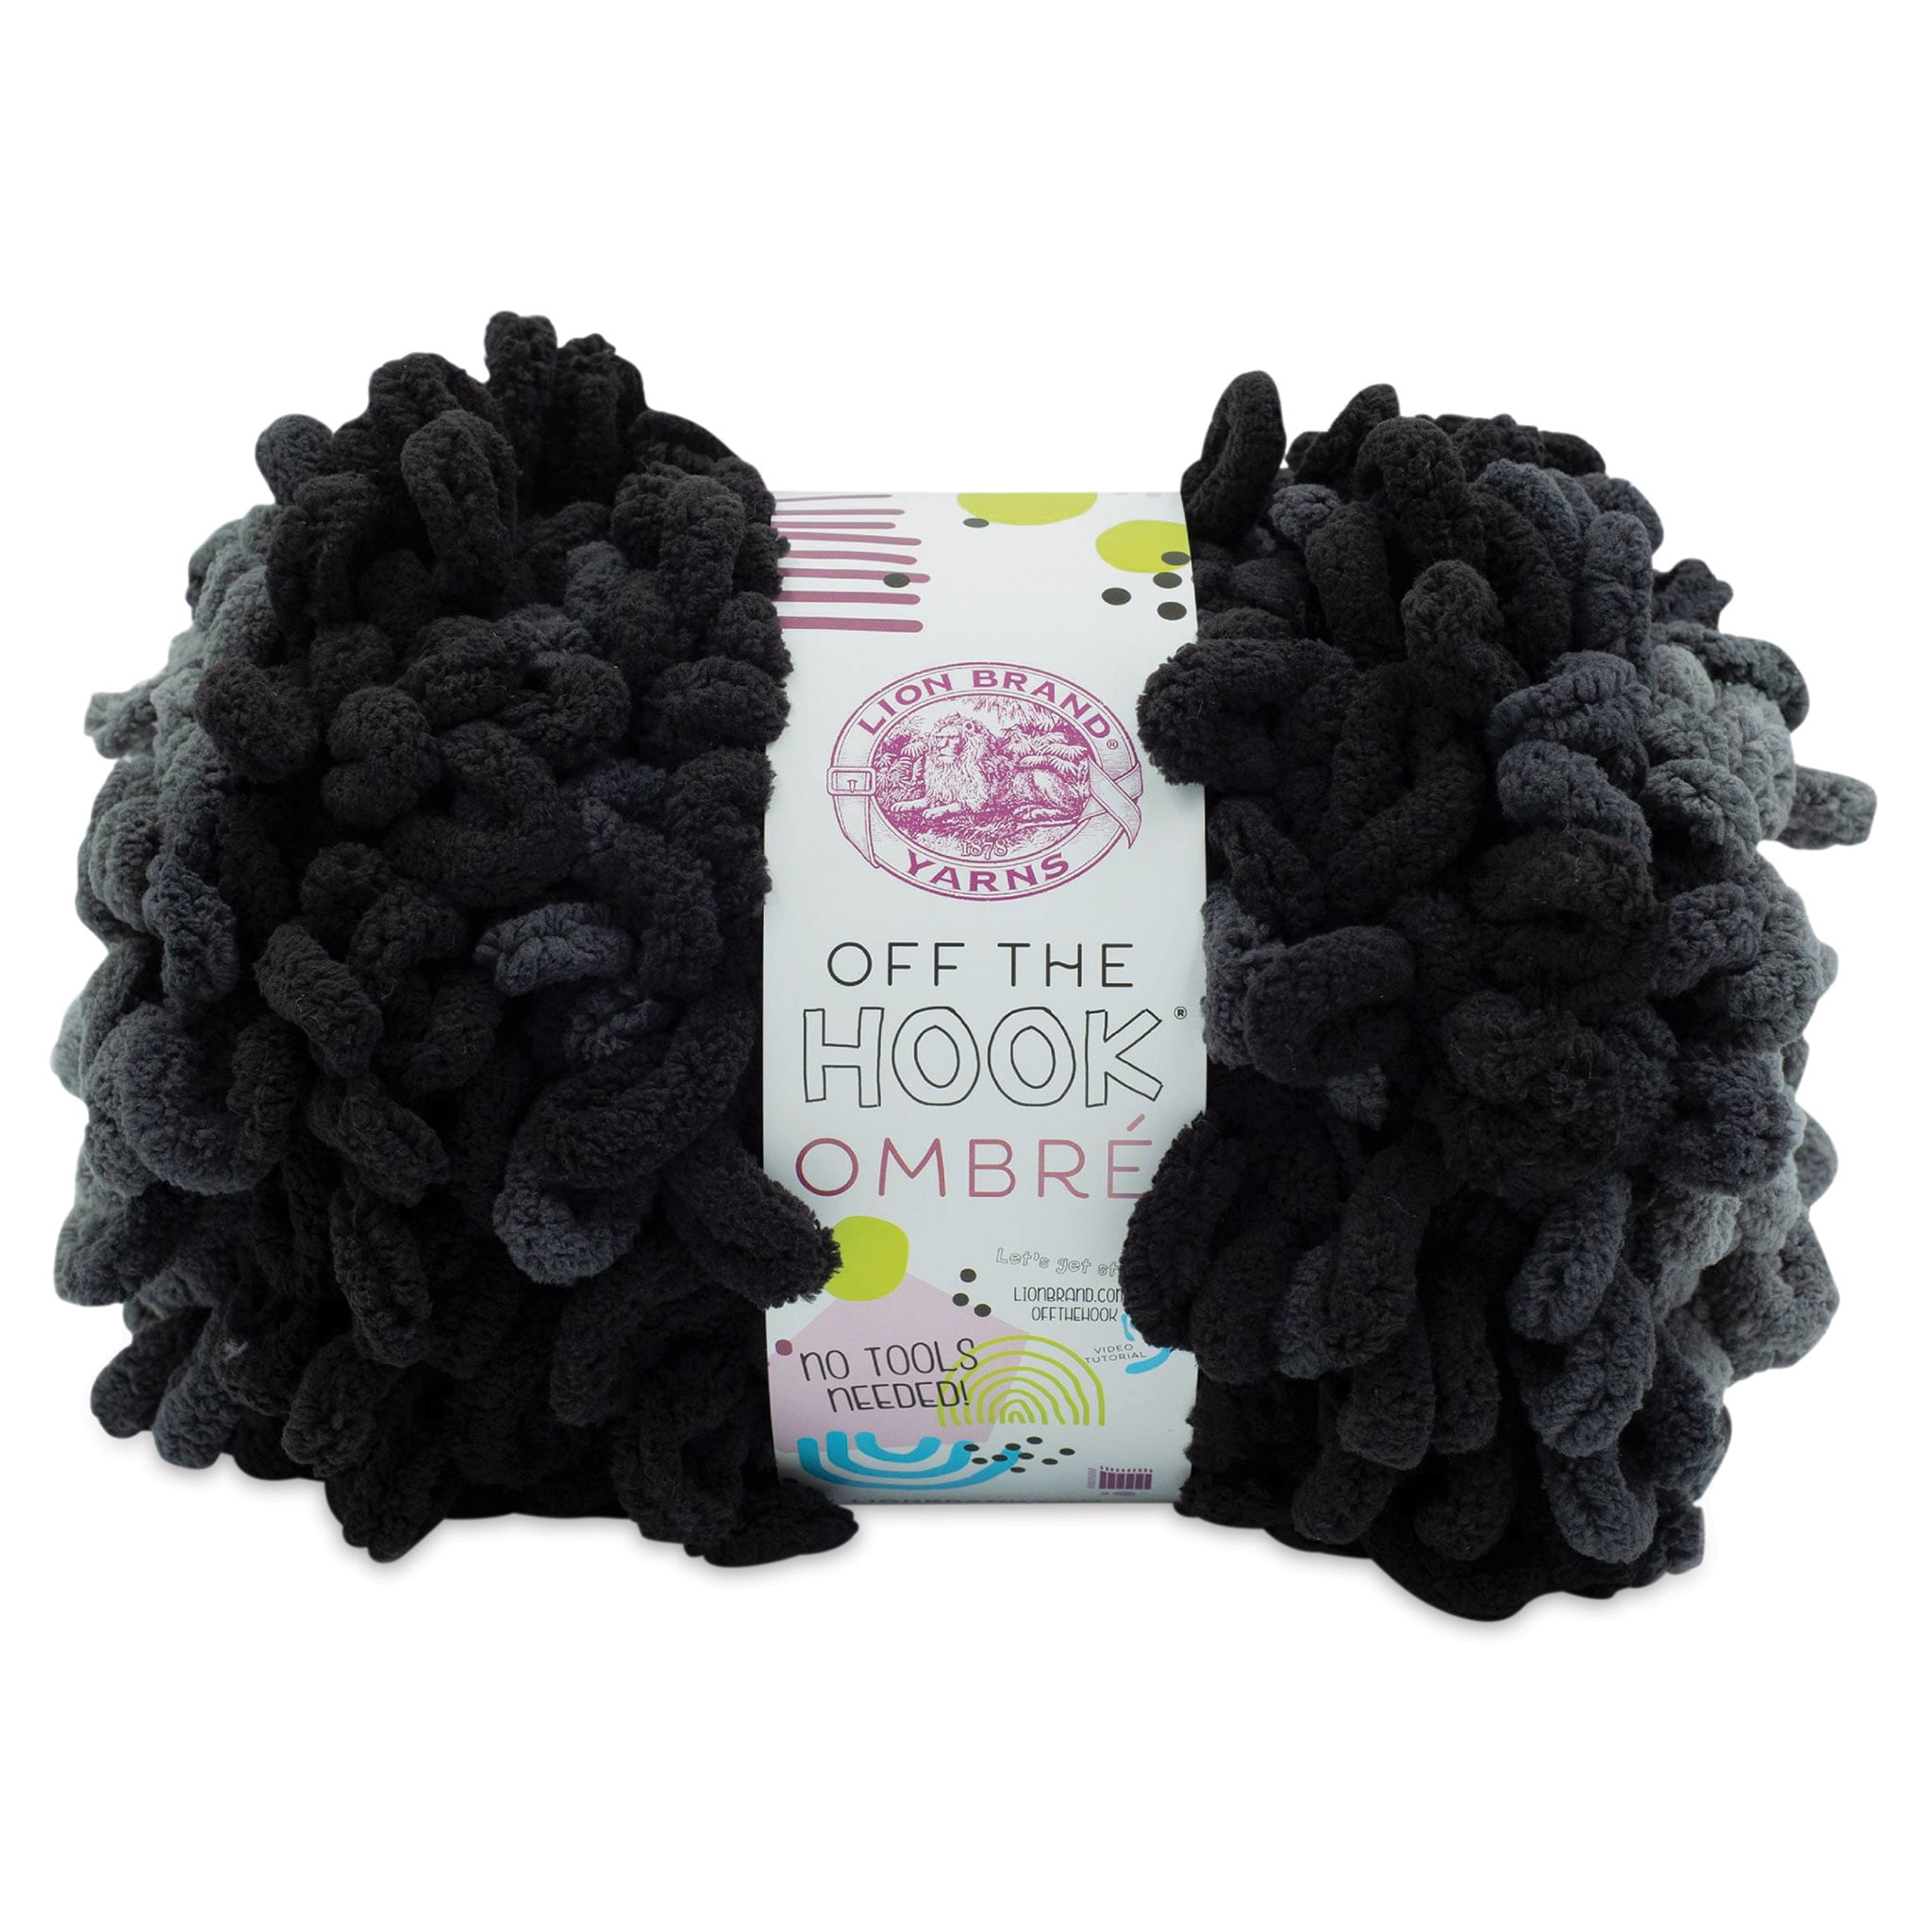 Lion Brand Off the Hook Ombré Yarn - Fade to Black 